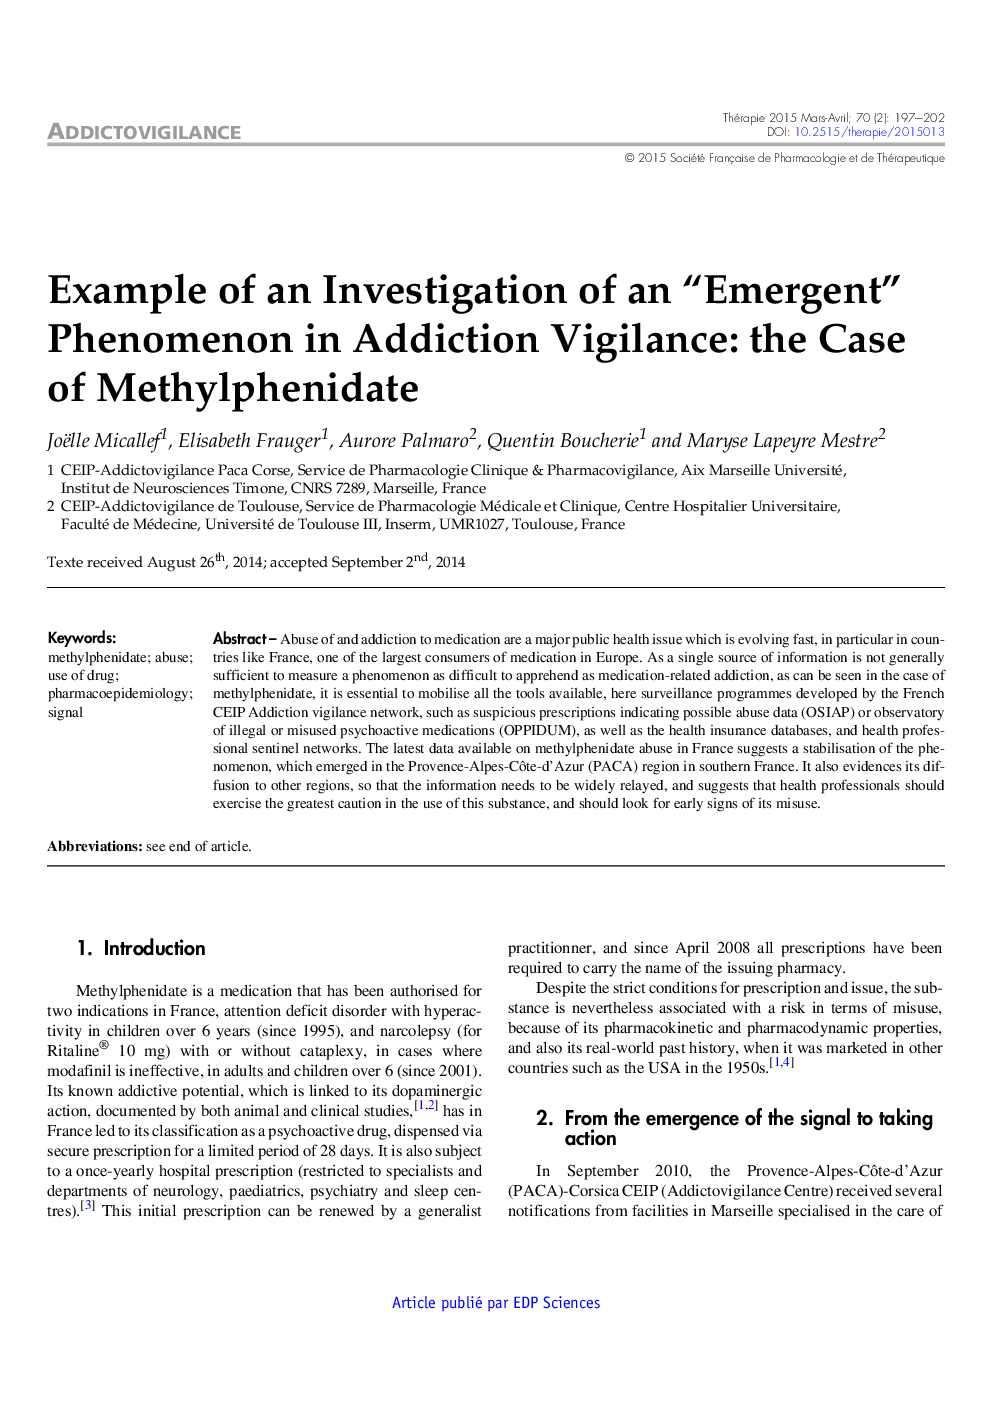 Example of an Investigation of an “Emergent” Phenomenon in Addiction Vigilance: the Case of Methylphenidate